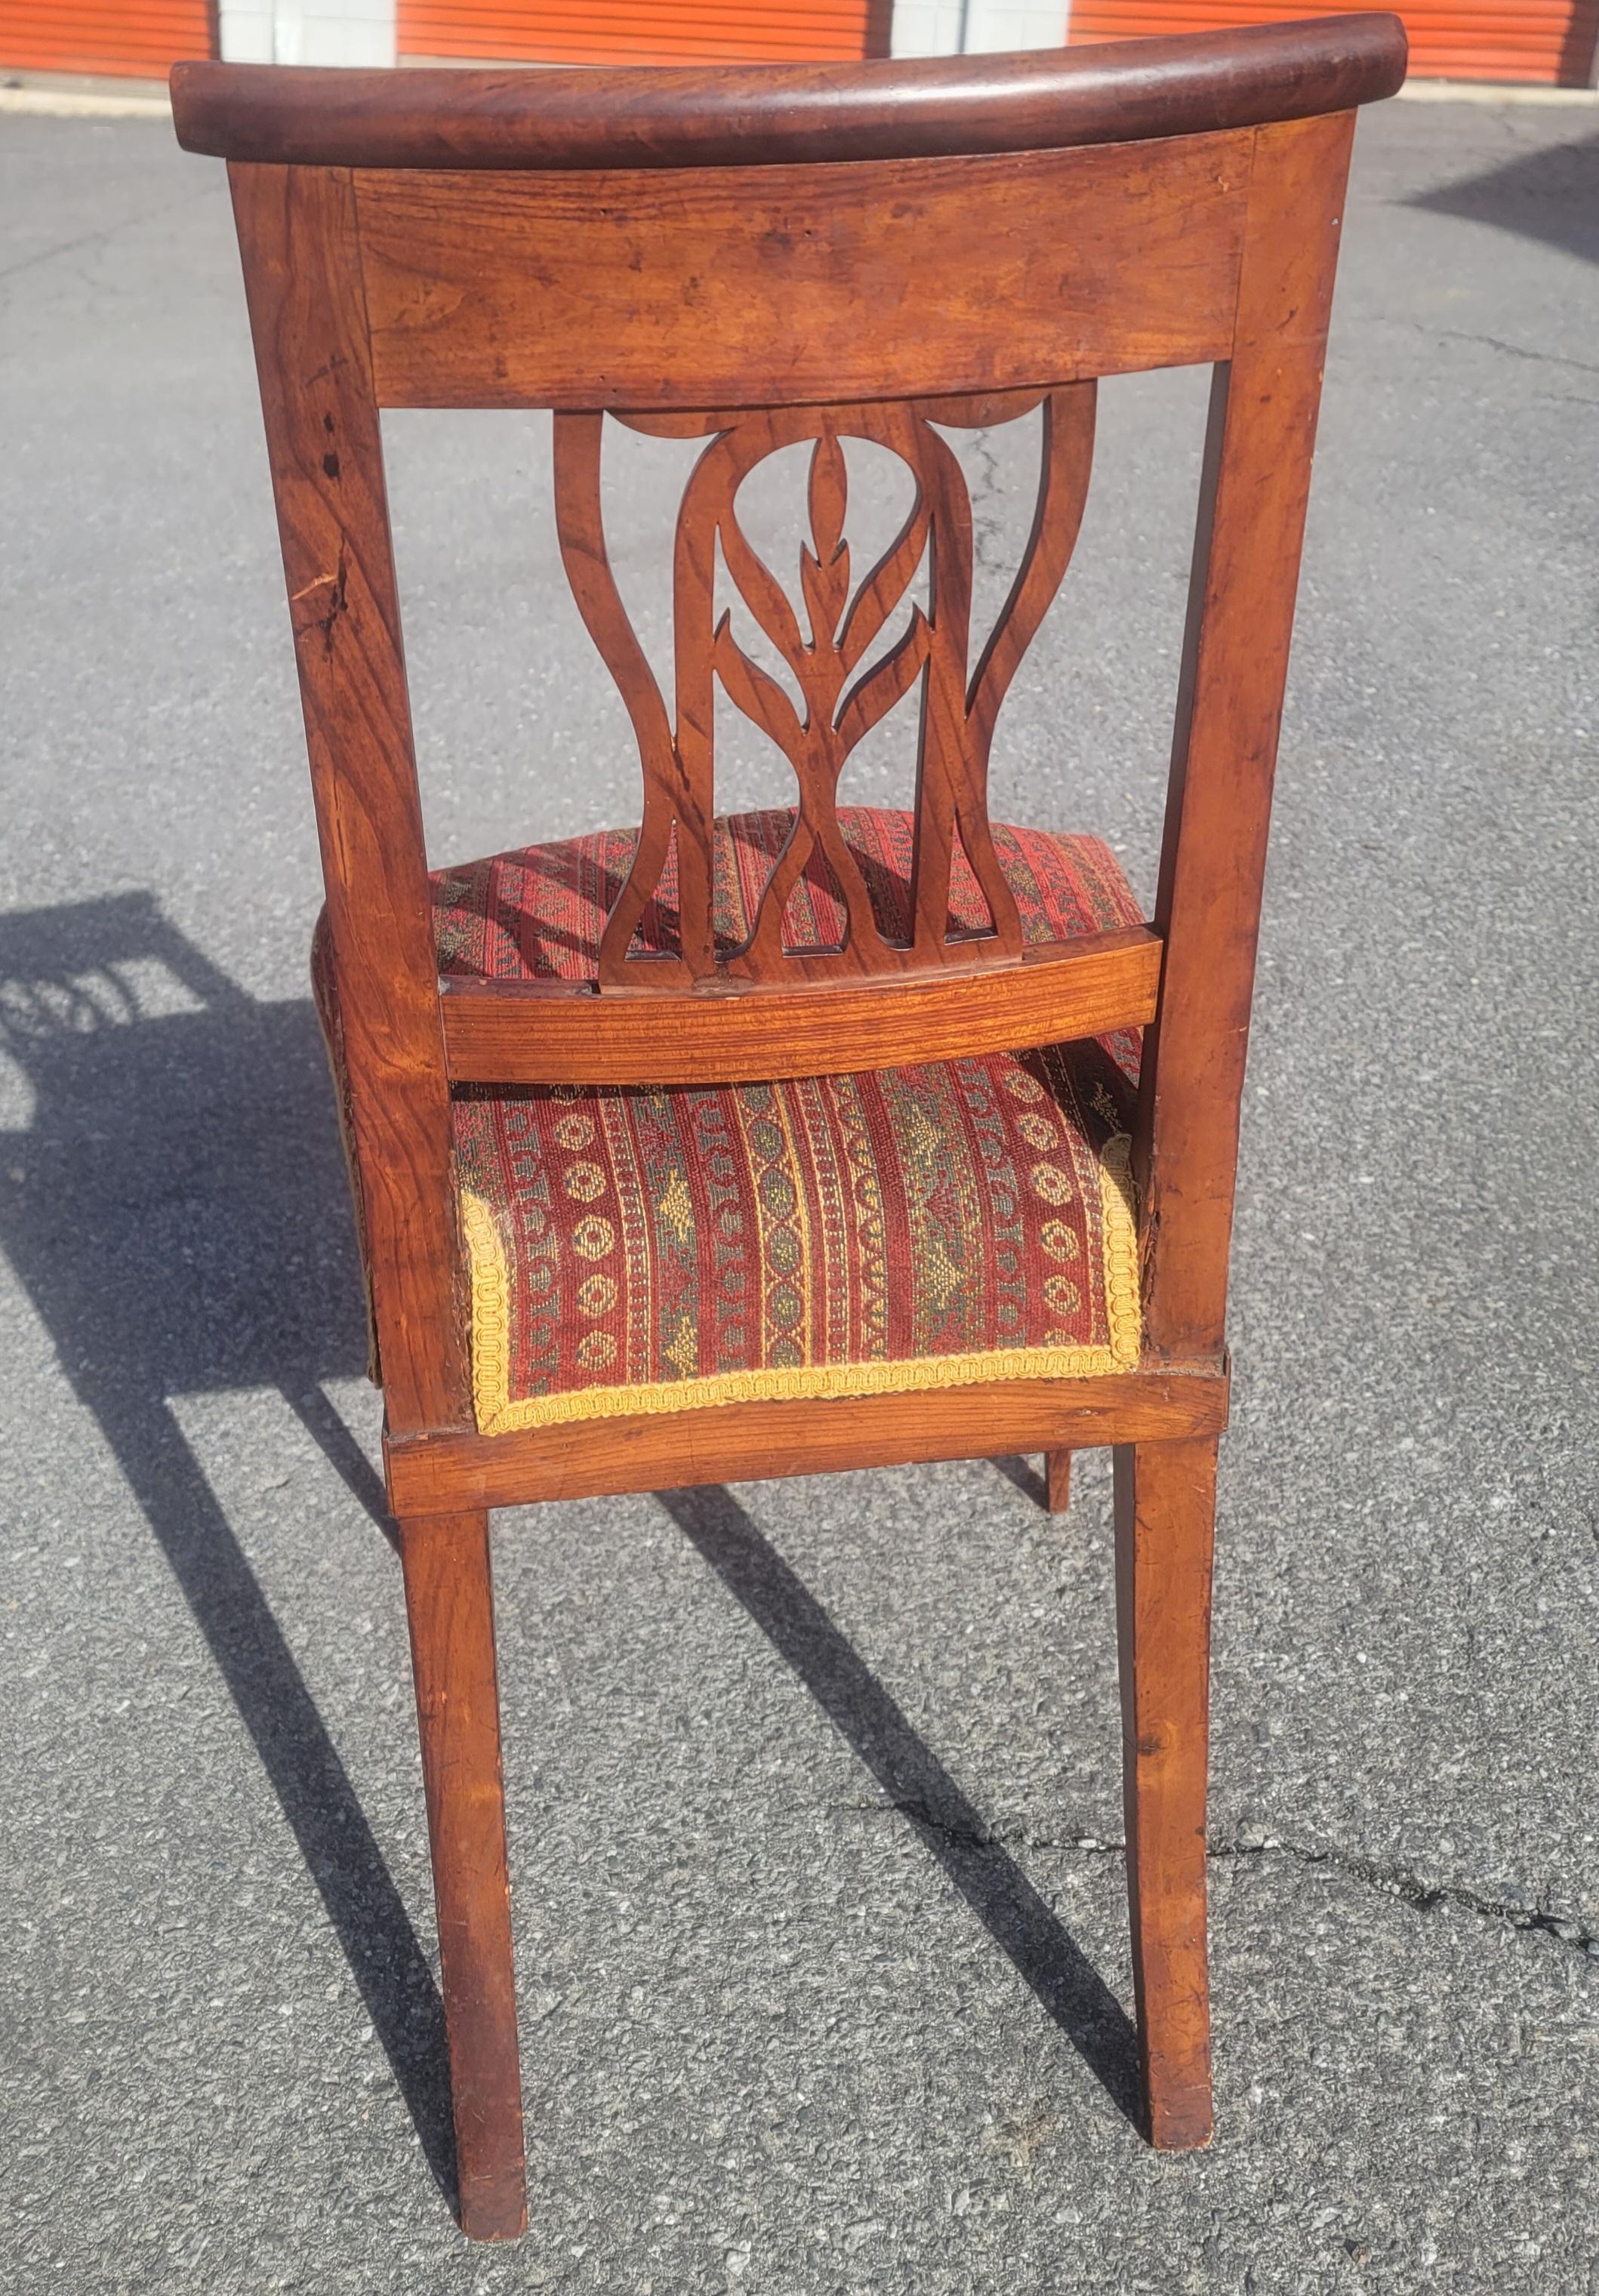 19th C. Swedish Continental Brass Mounted & Parquetry Inlaid Cherry Chairs, Pair In Good Condition For Sale In Germantown, MD